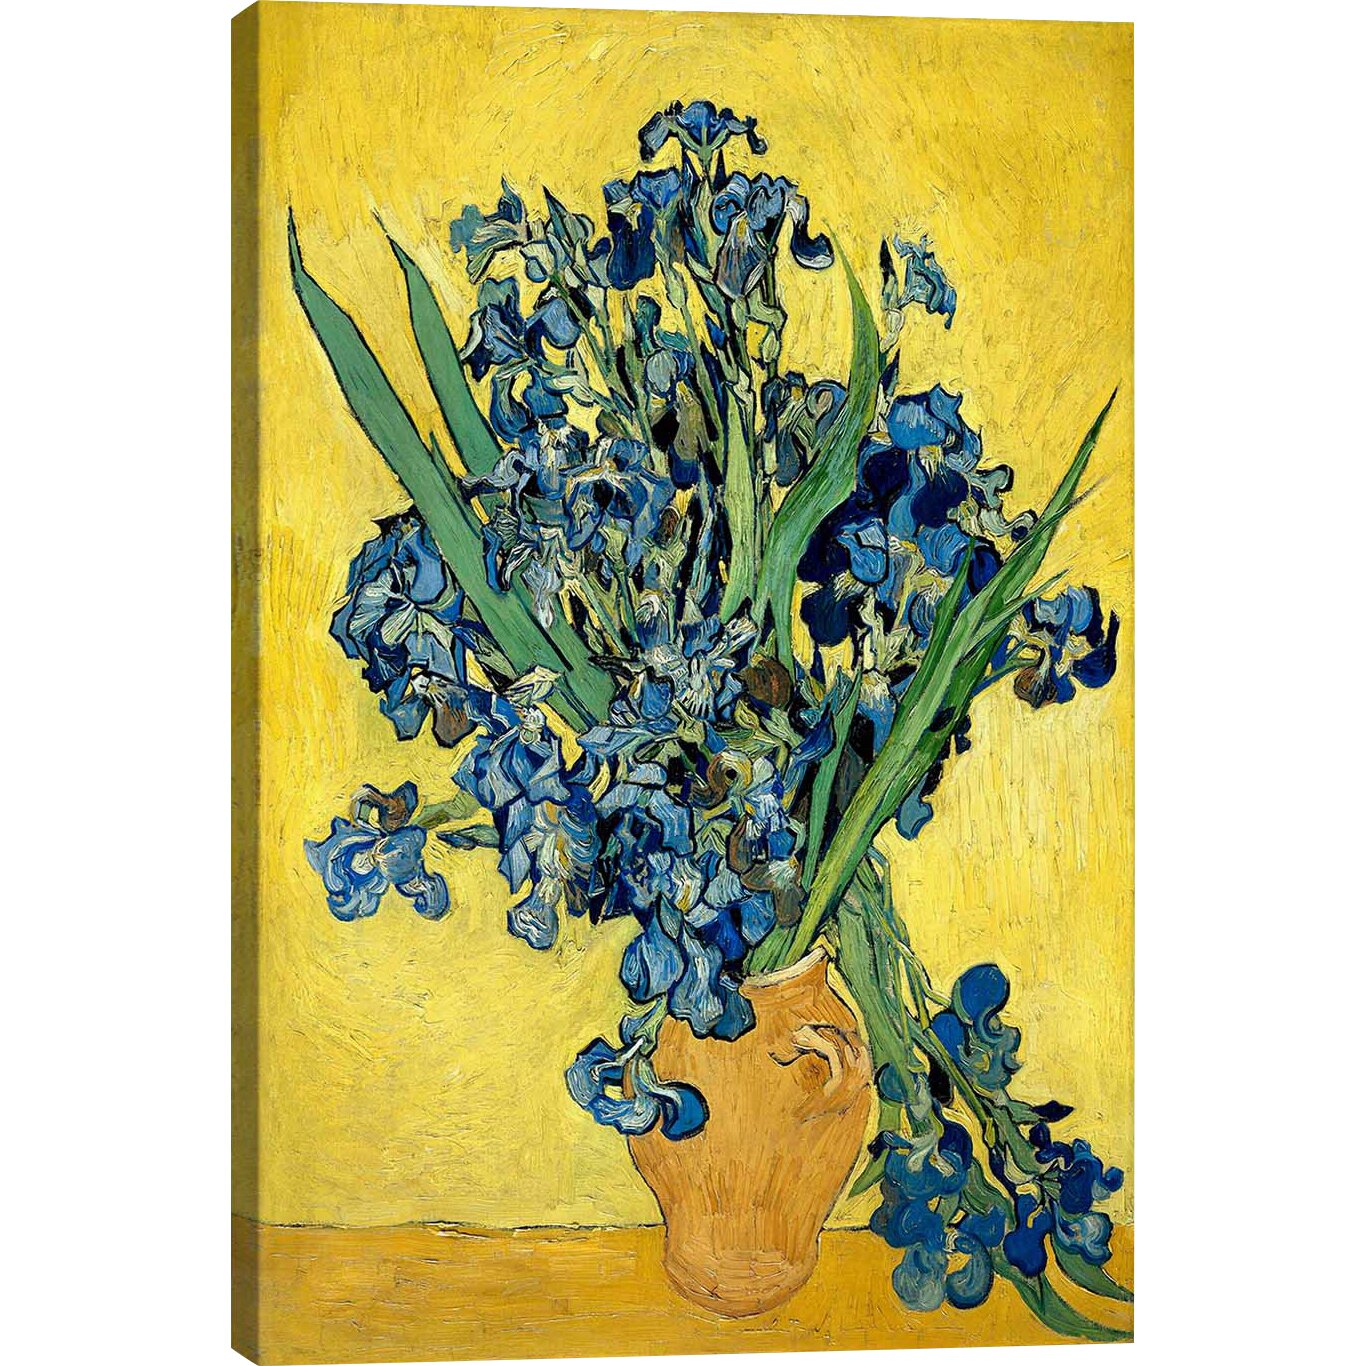 iCanvas 'Vase with Irises Against a Background' by Vincent Van Gogh ...